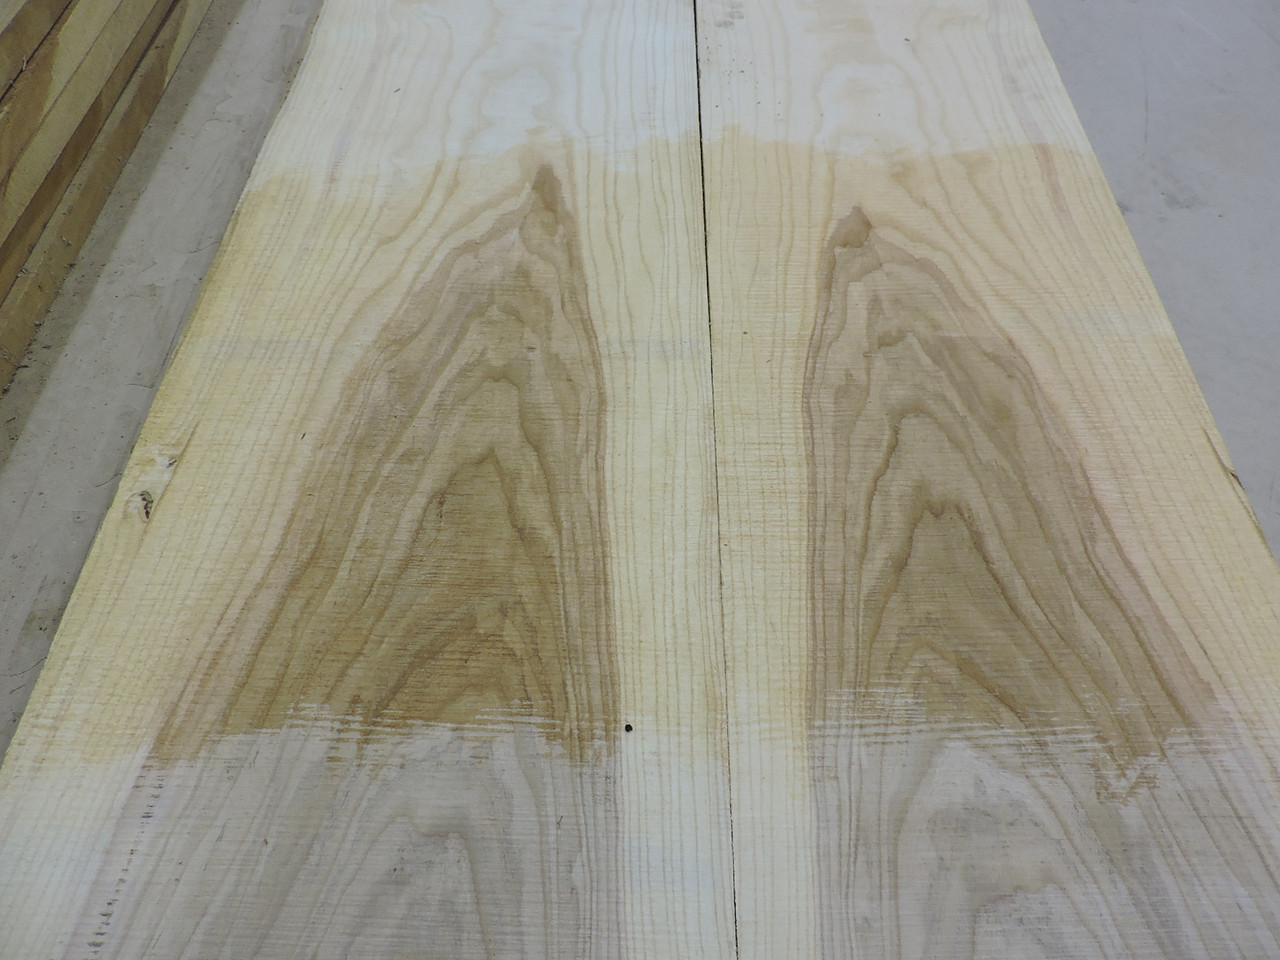 4/4 Bookmatched Ash boards  - 2371